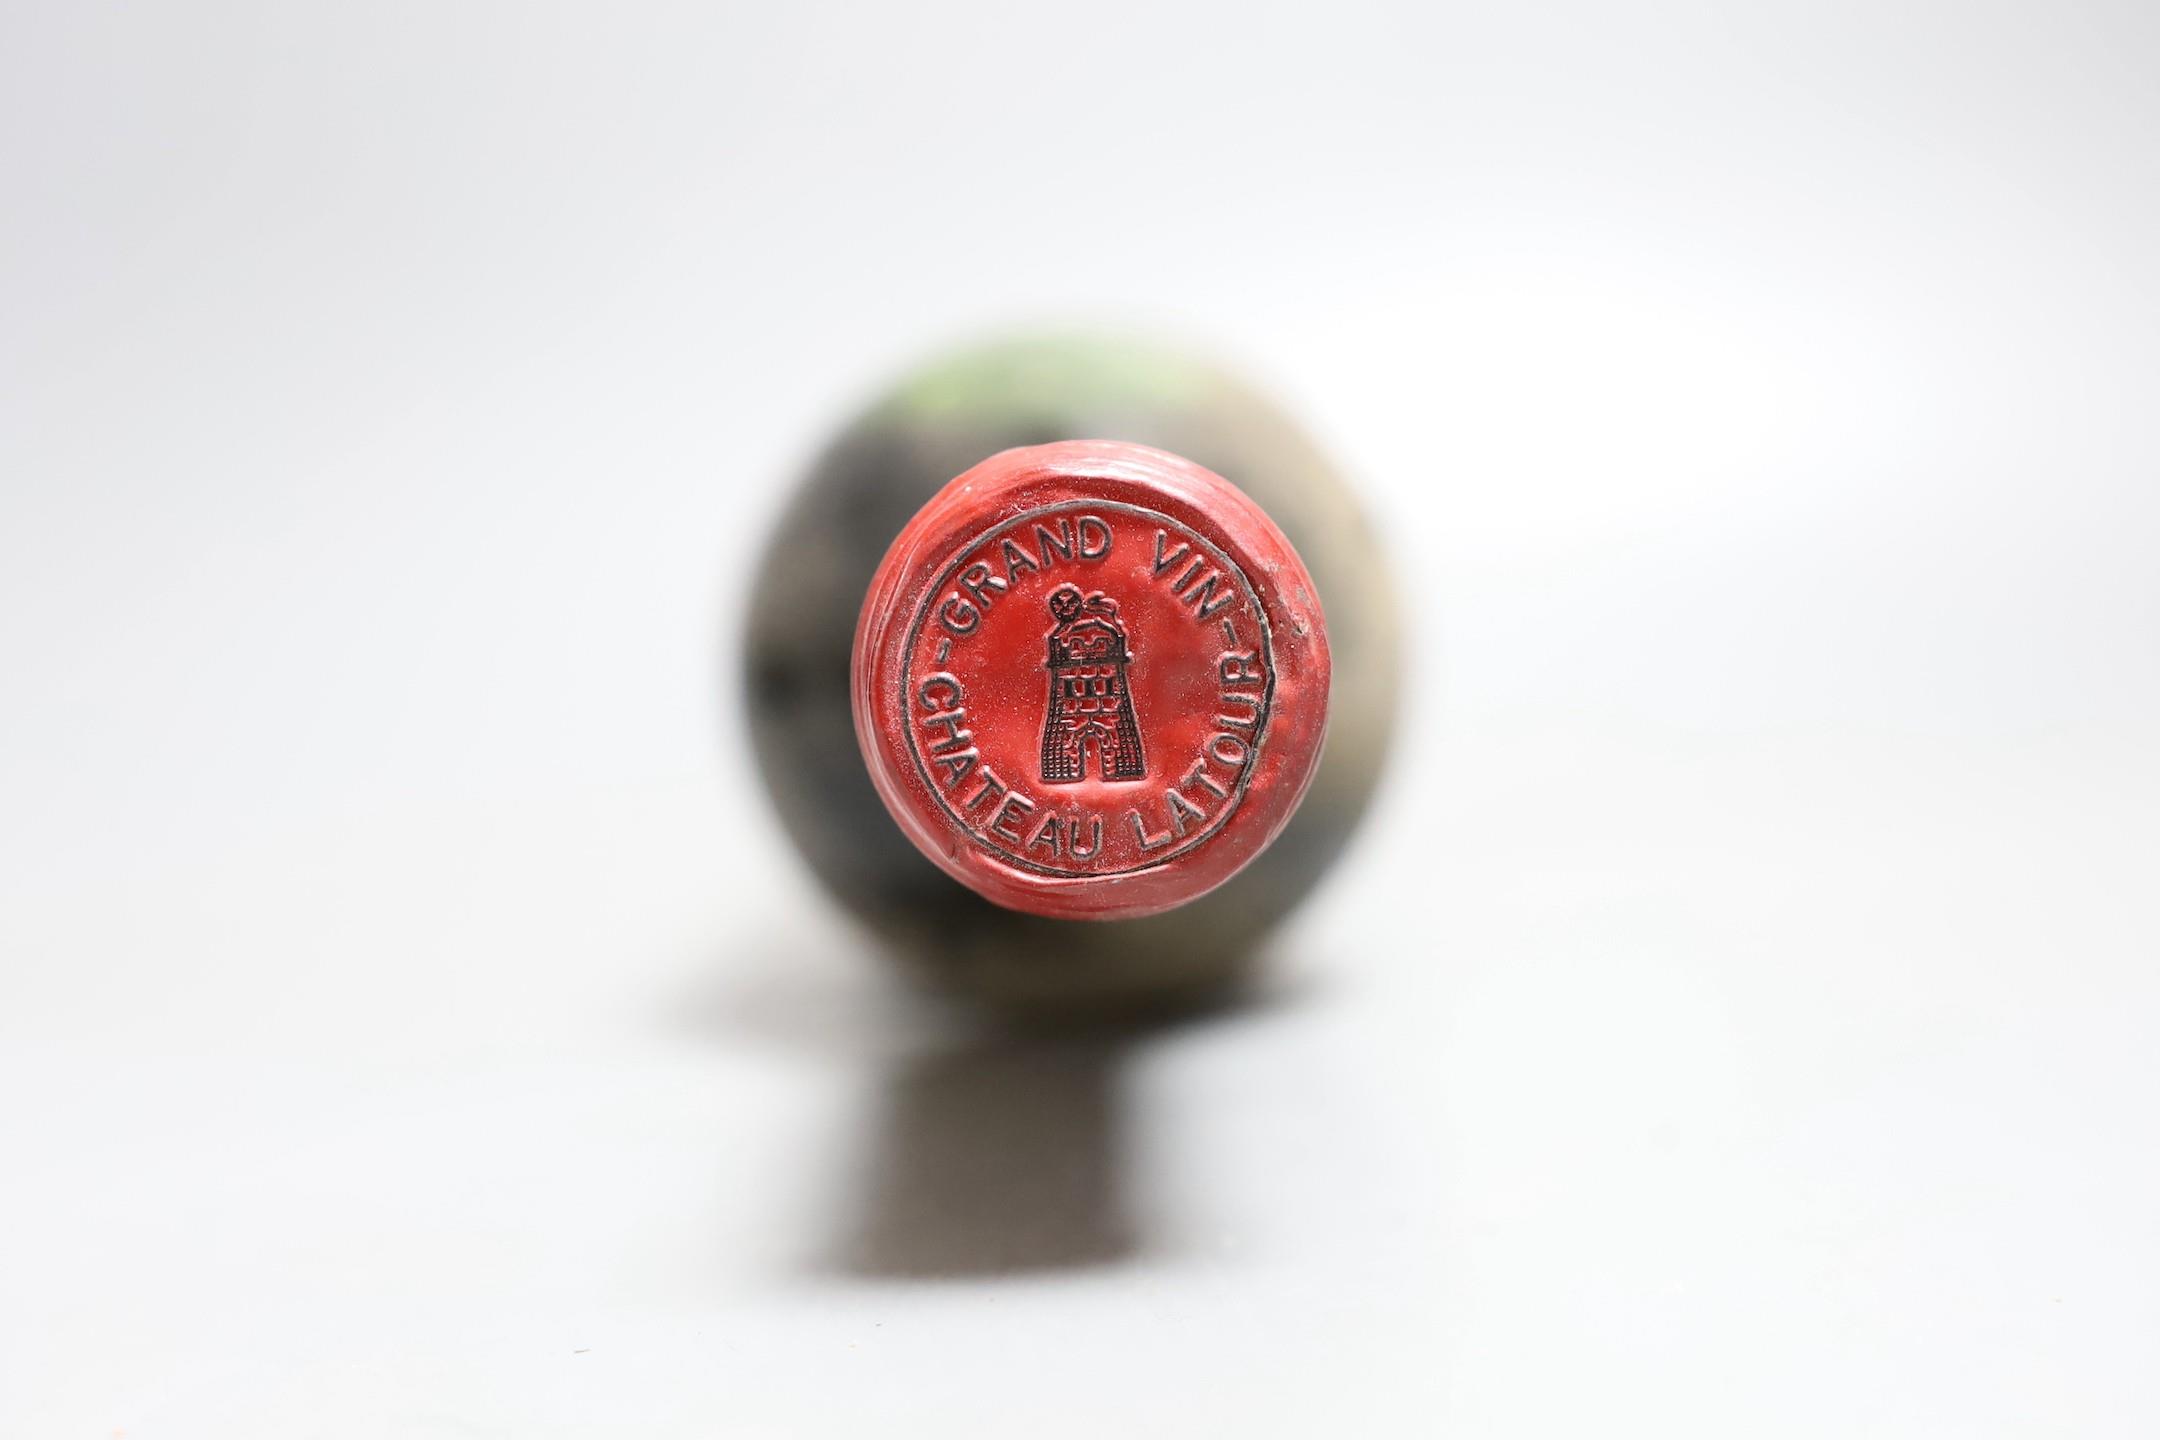 A bottle of Chateau Latour, date unknown, label missing - Image 2 of 2